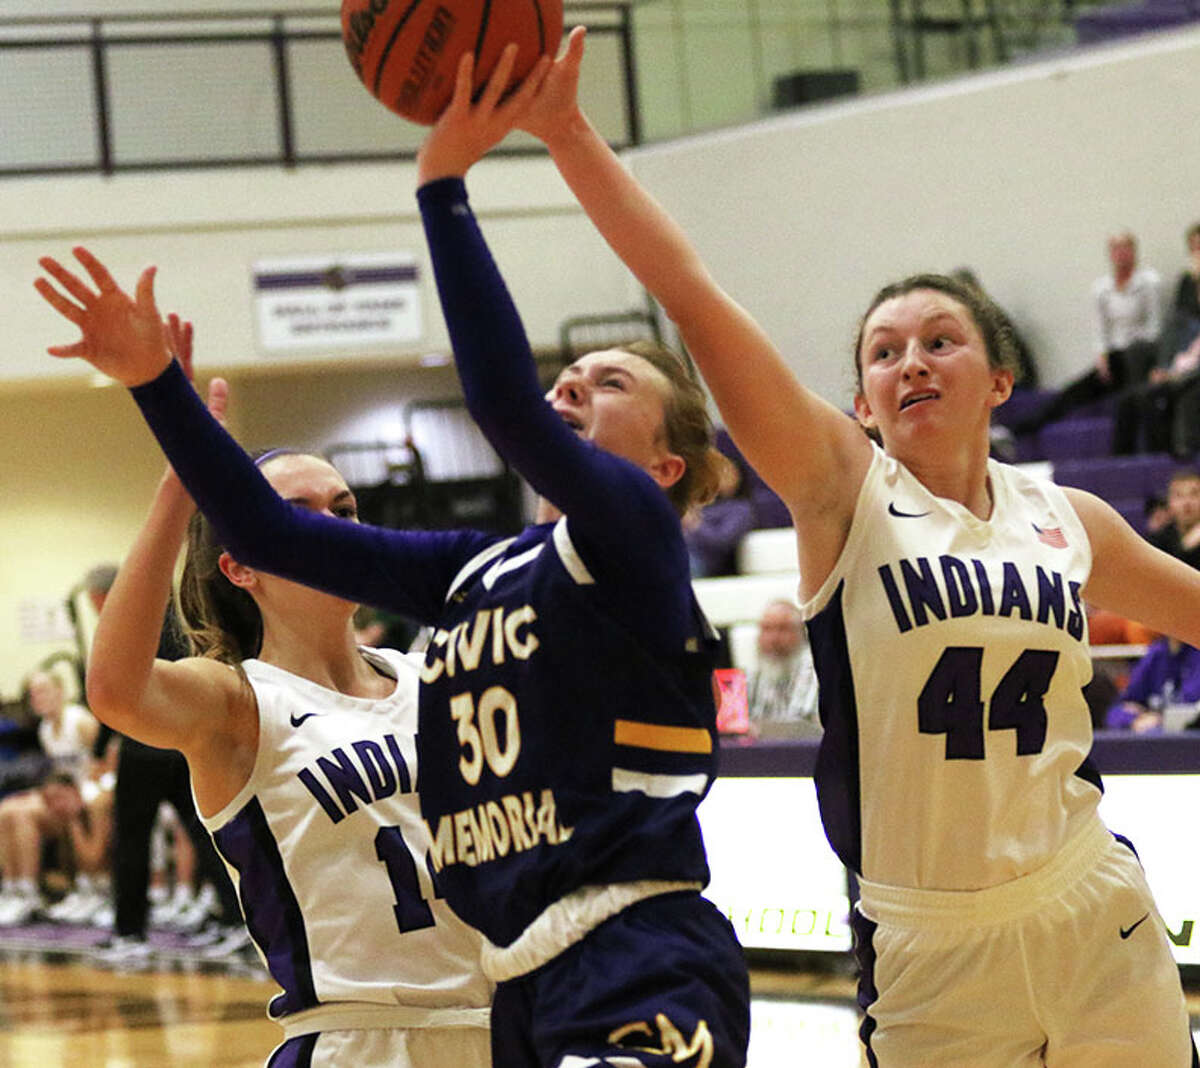 CM's Marlee Durbin (30) scores off a steal after beating Mascoutah's Bella Hart to the basket in the final minute of the third quarter of a MVC game Monday night in Mascoutah.